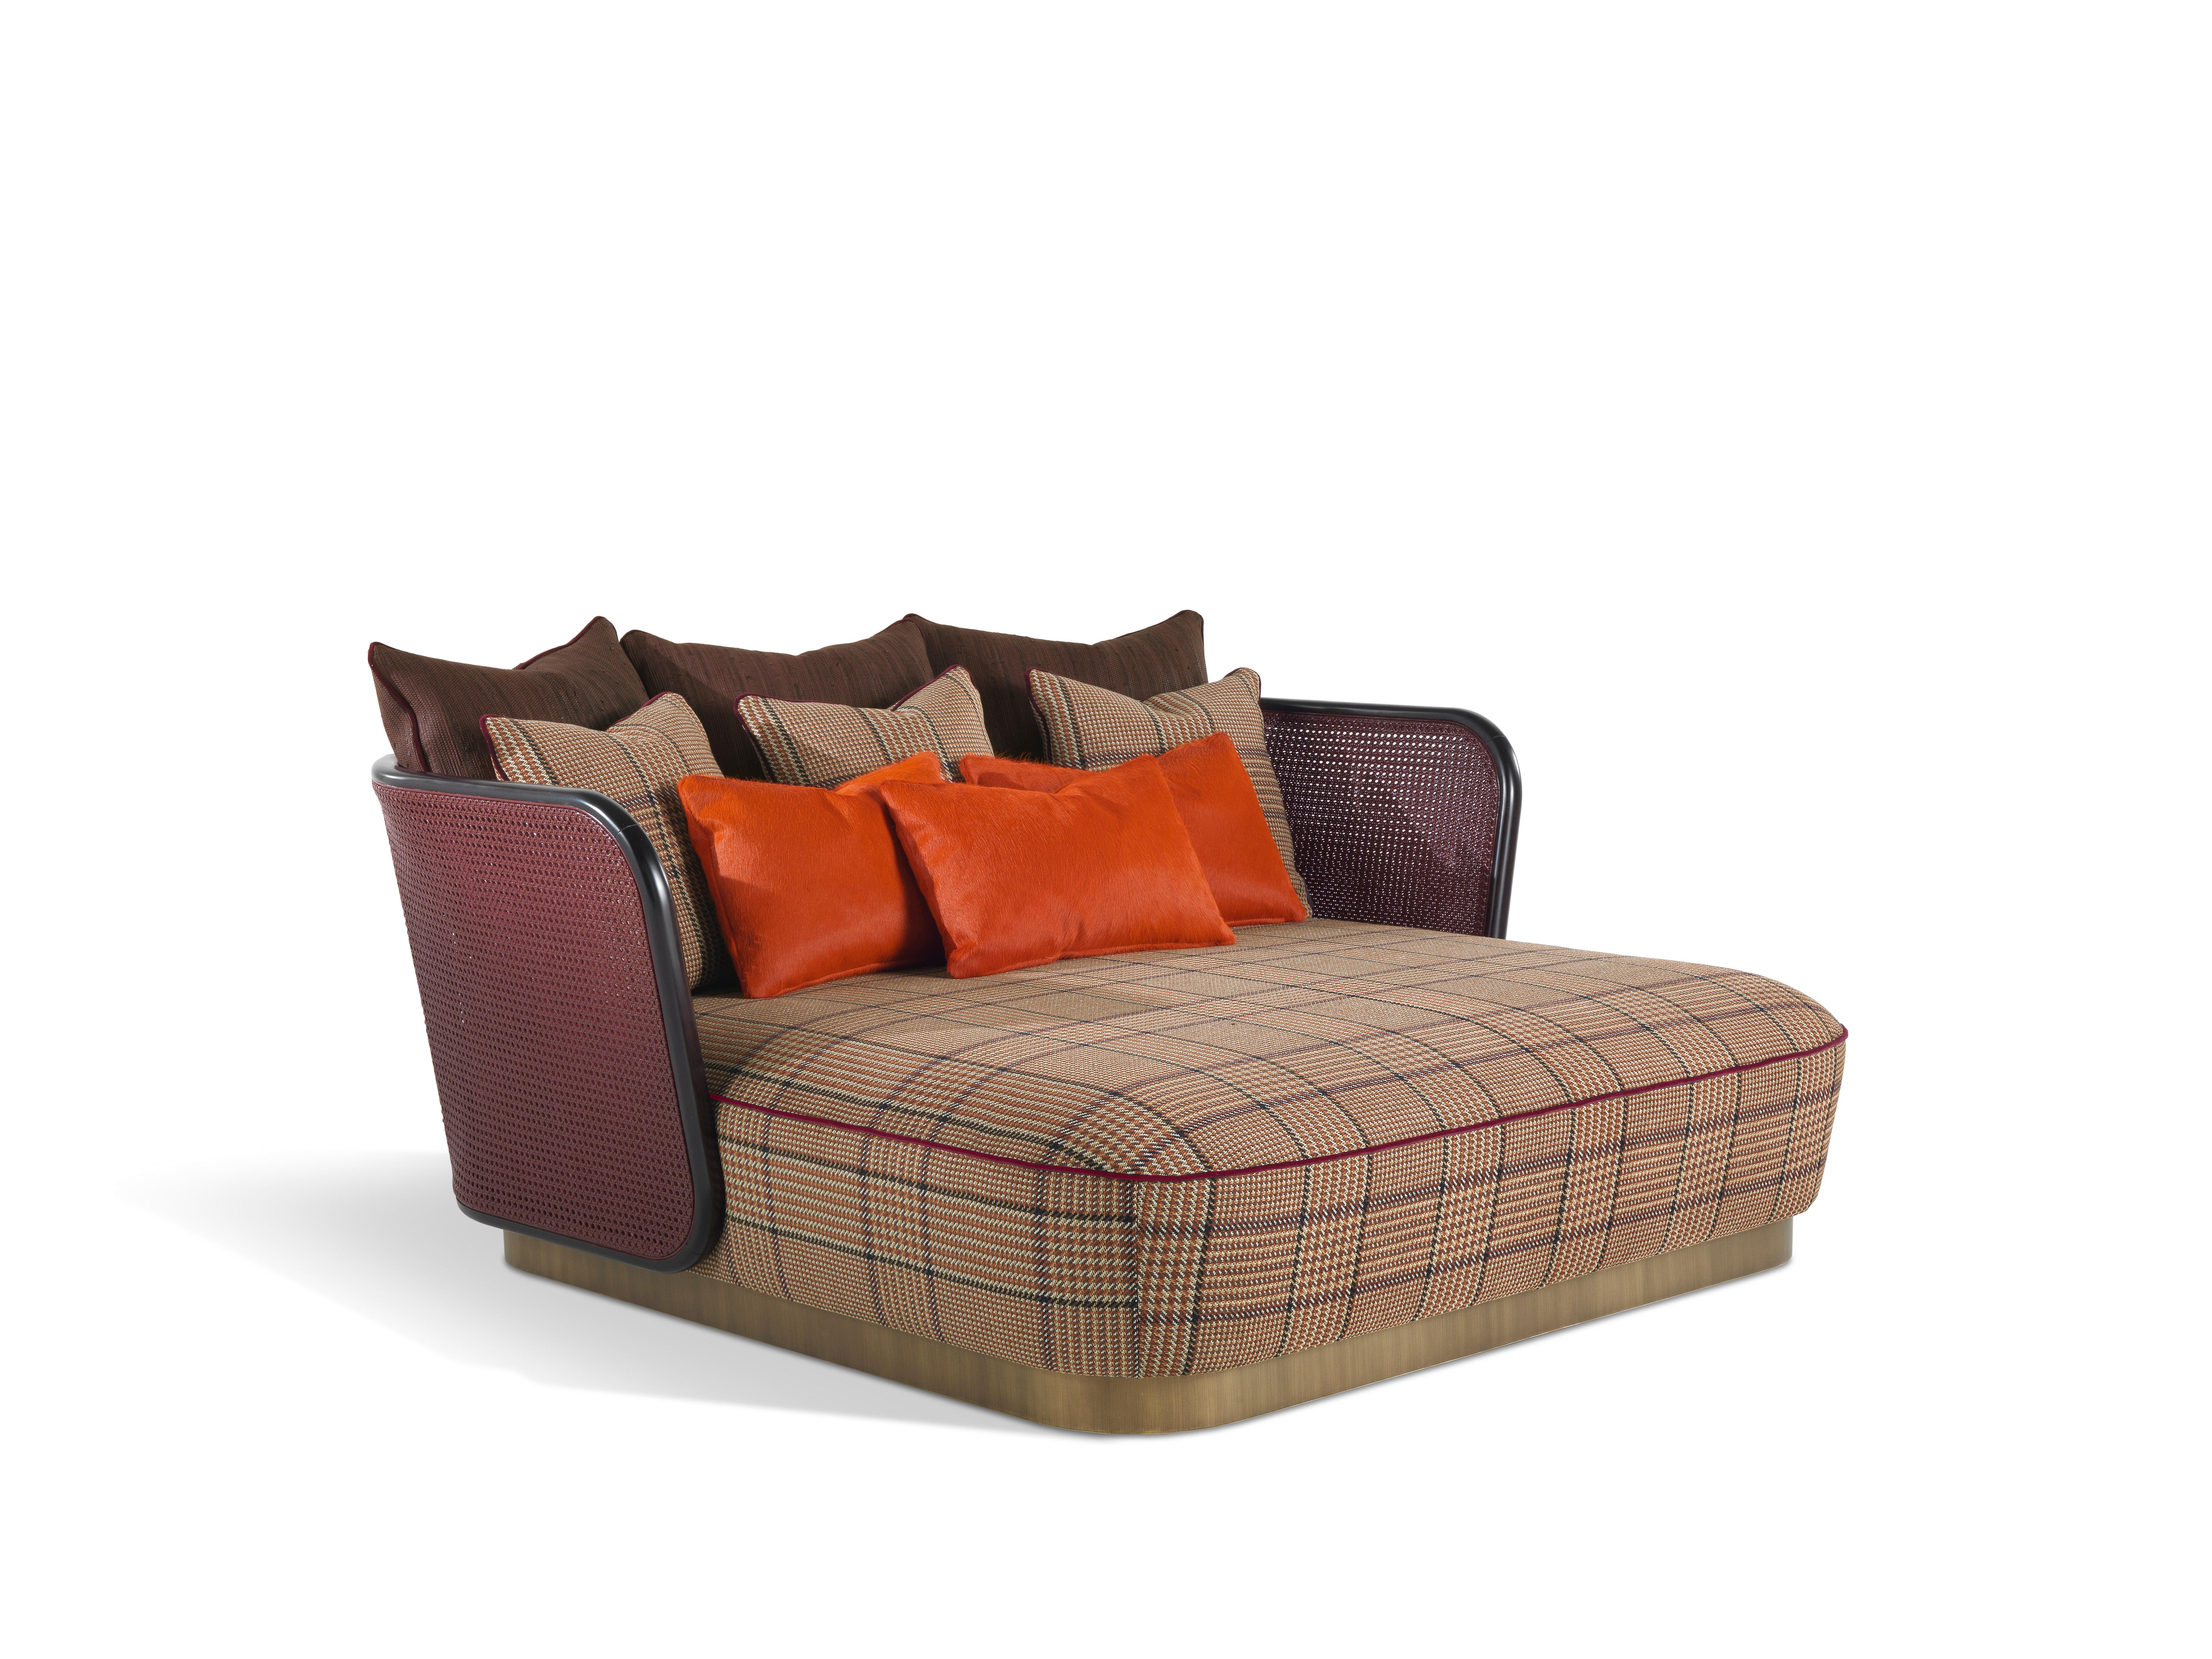 In perfect balance between linearity and movement, the chaise longue Caral boasts an elegant, comfortable and dynamic design. The chaise longue is upholstered in a precious and light fabric with a typical Etro pattern, with a low and comfortable